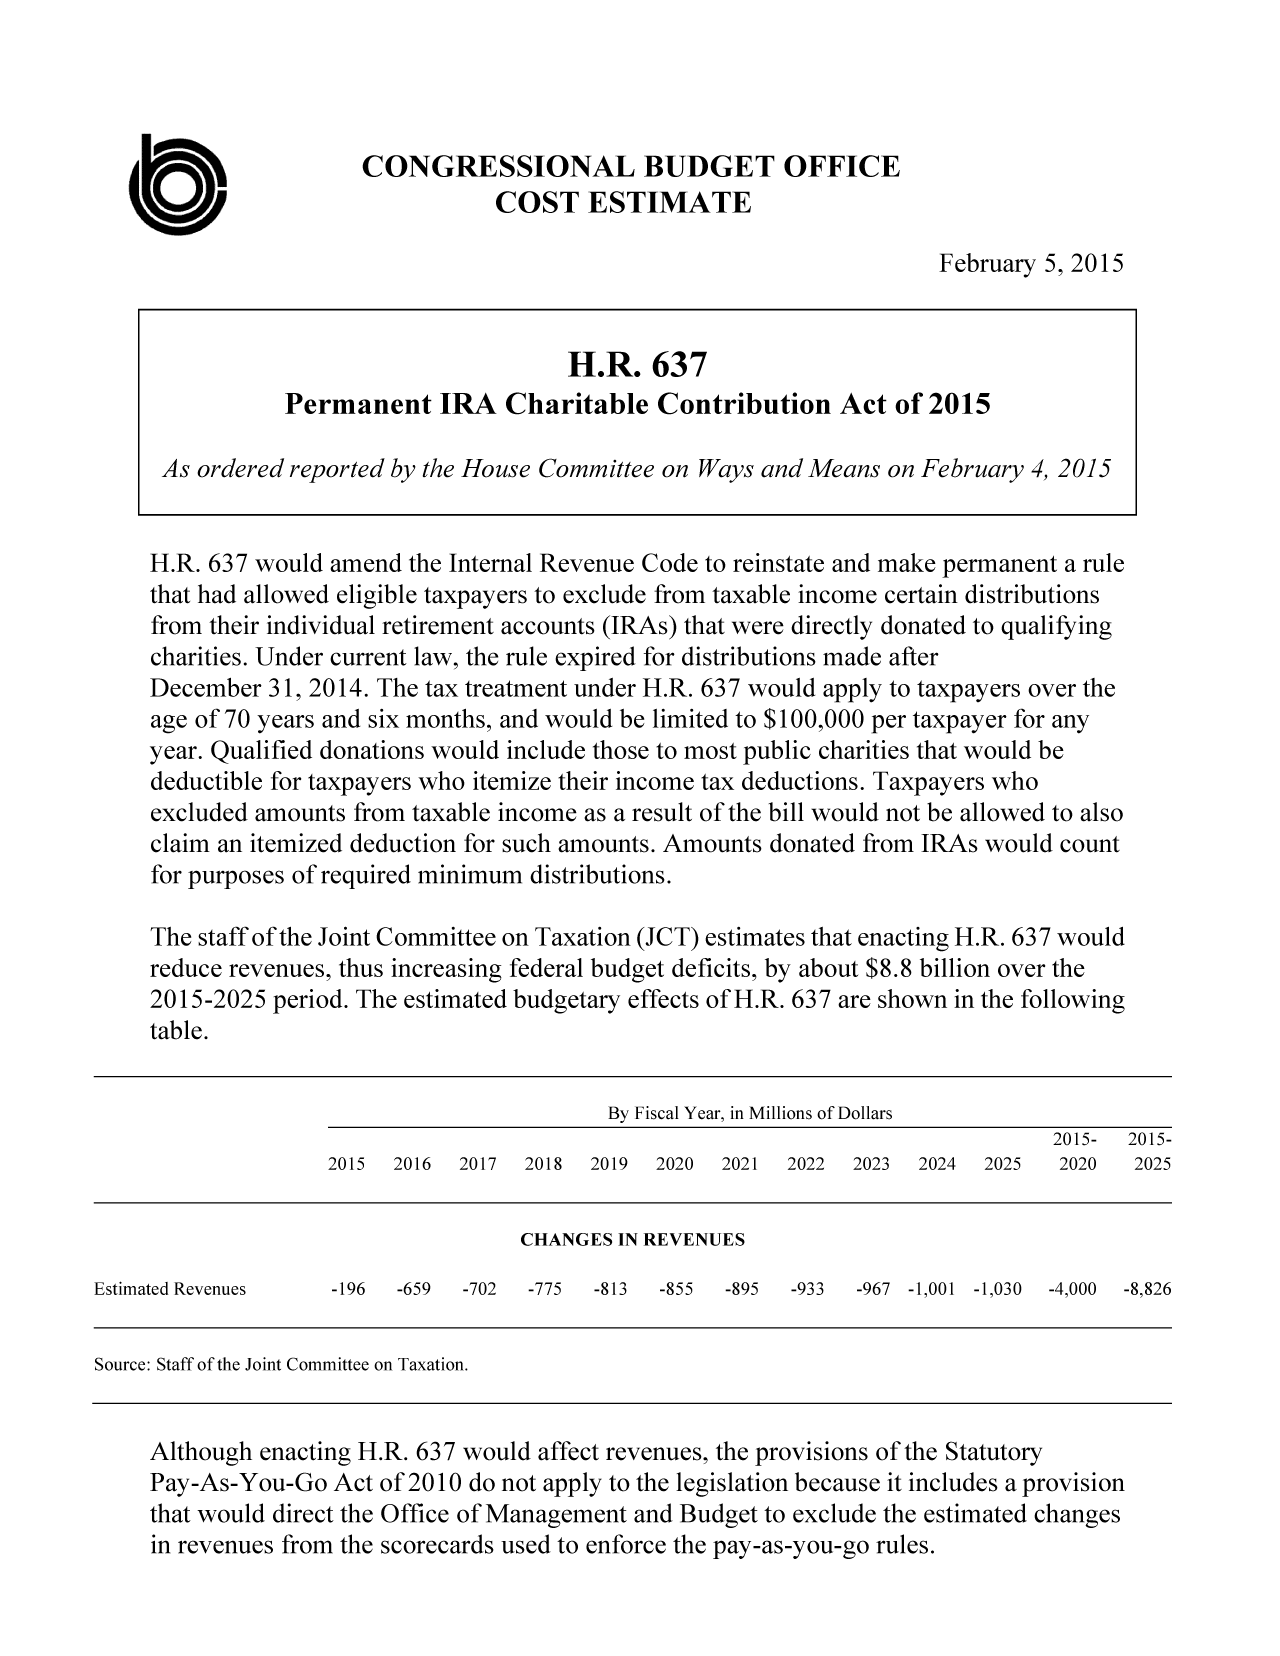 handle is hein.congrec/cbo2061 and id is 1 raw text is: CONGRESSIONAL BUDGET OFFICE
COST ESTIMATE

February 5, 2015

H.R. 637 would amend the Internal Revenue Code to reinstate and make permanent a rule
that had allowed eligible taxpayers to exclude from taxable income certain distributions
from their individual retirement accounts (IRAs) that were directly donated to qualifying
charities. Under current law, the rule expired for distributions made after
December 31, 2014. The tax treatment under H.R. 637 would apply to taxpayers over the
age of 70 years and six months, and would be limited to $100,000 per taxpayer for any
year. Qualified donations would include those to most public charities that would be
deductible for taxpayers who itemize their income tax deductions. Taxpayers who
excluded amounts from taxable income as a result of the bill would not be allowed to also
claim an itemized deduction for such amounts. Amounts donated from IRAs would count
for purposes of required minimum distributions.
The staff of the Joint Committee on Taxation (JCT) estimates that enacting H.R. 637 would
reduce revenues, thus increasing federal budget deficits, by about $8.8 billion over the
2015-2025 period. The estimated budgetary effects of H.R. 637 are shown in the following
table.
By Fiscal Year, in Millions of Dollars
2015-  2015-
2015  2016  2017  2018  2019  2020  2021  2022  2023  2024  2025  2020  2025
CHANGES IN REVENUES
Estimated Revenues  -196  -659  -702  -775  -813  -855  -895  -933  -967 -1,001 -1,030 -4,000 -8,826
Source: Staff of the Joint Committee on Taxation.
Although enacting H.R. 637 would affect revenues, the provisions of the Statutory
Pay-As-You-Go Act of 2010 do not apply to the legislation because it includes a provision
that would direct the Office of Management and Budget to exclude the estimated changes
in revenues from the scorecards used to enforce the pay-as-you-go rules.

H.R. 637
Permanent IRA Charitable Contribution Act of 2015
As ordered reported by the House Committee on Ways and Means on February 4, 2015


